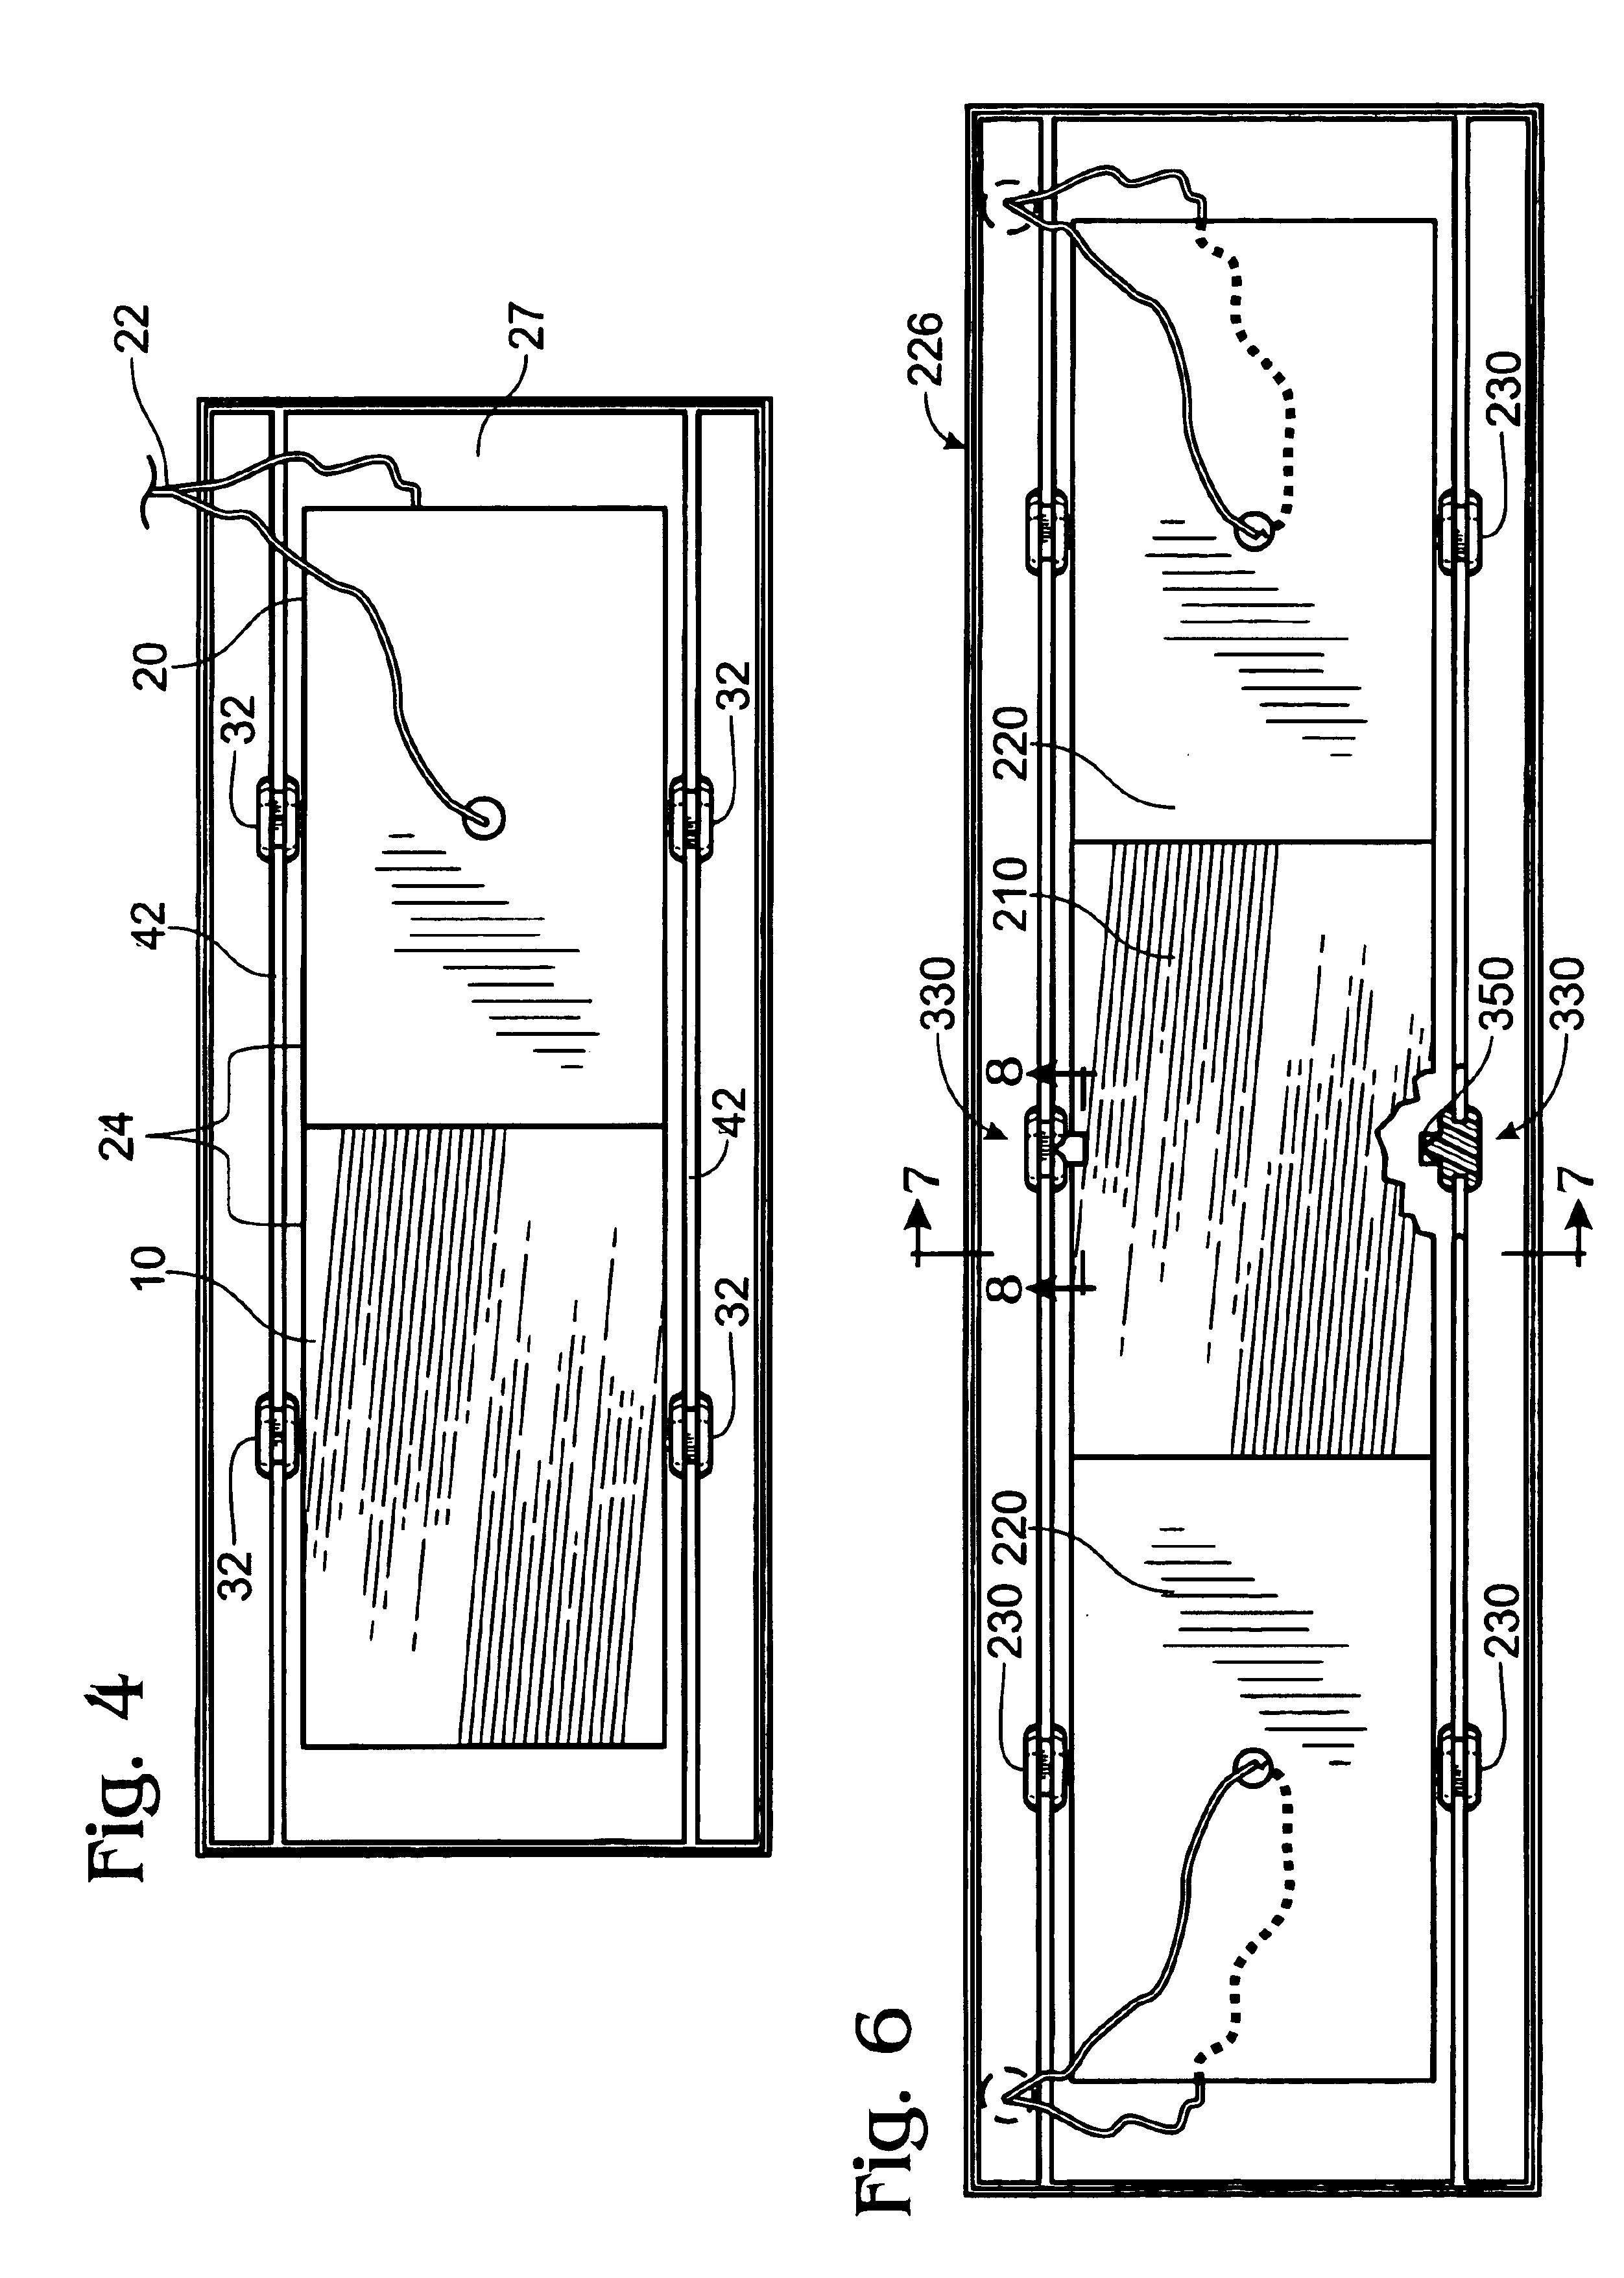 Mounting system for an optical assembly of a photoelastic modulator